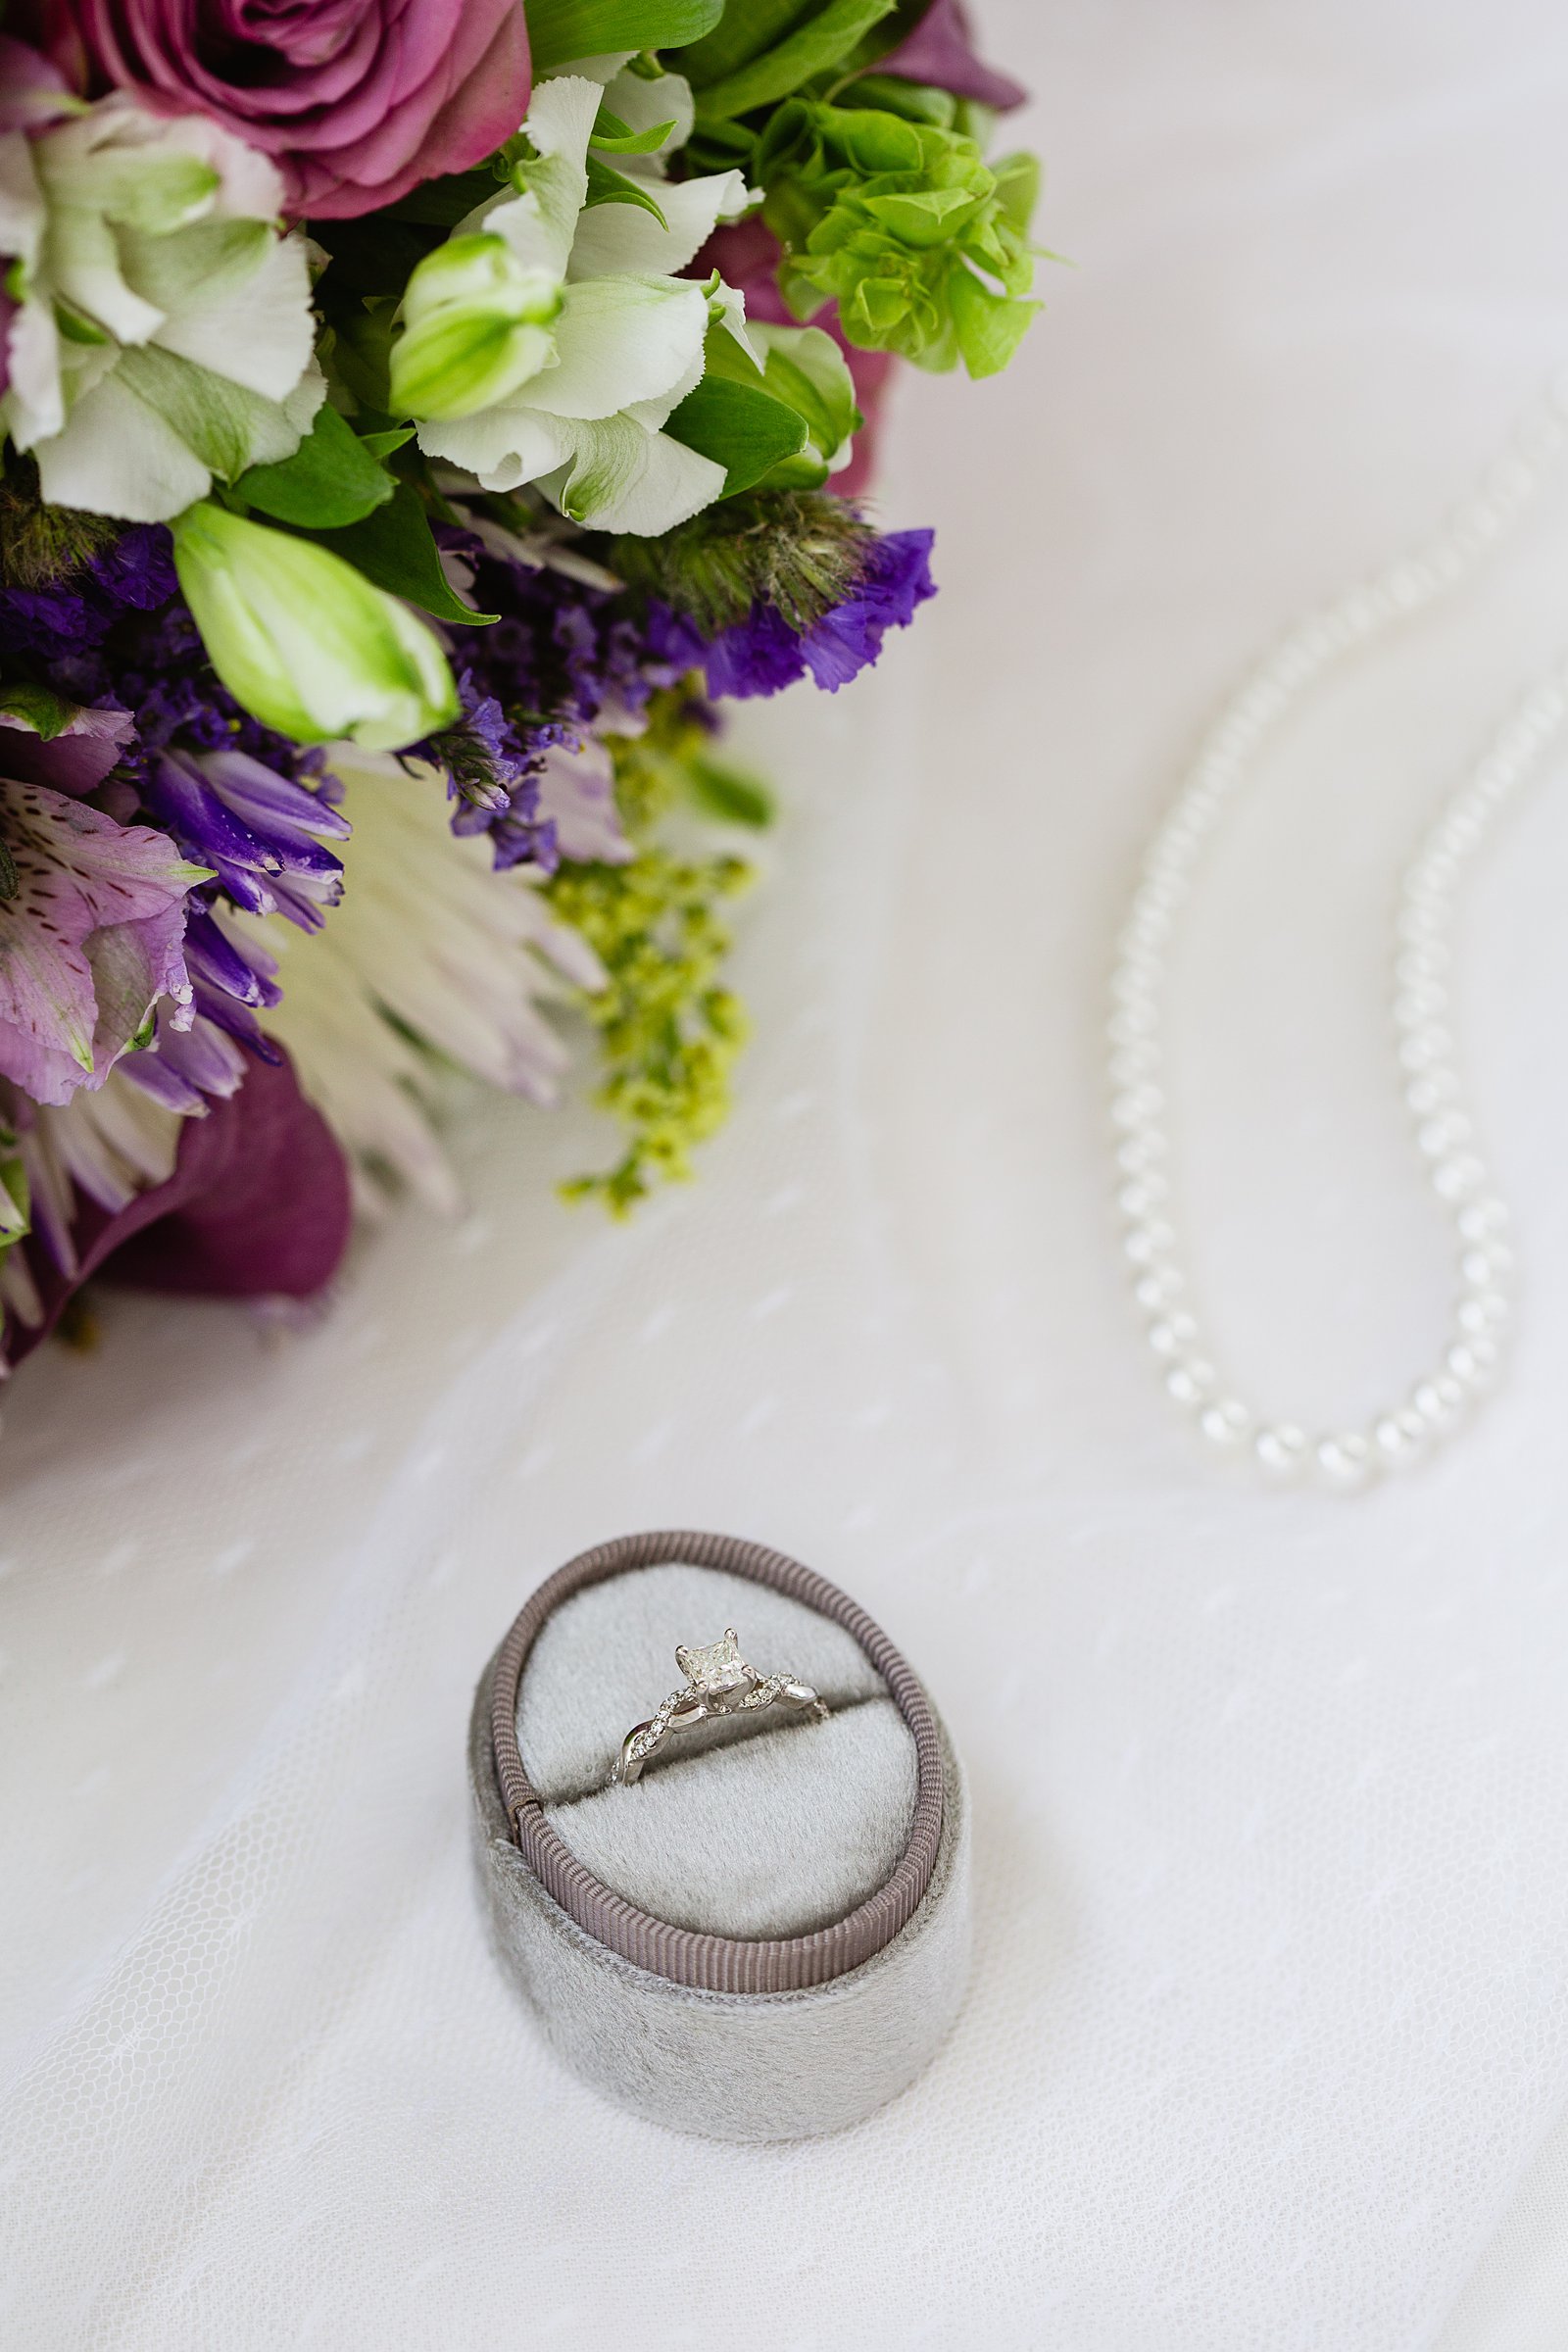 Brides's wedding day details of a classic wedding ring and string of pearls by PMA Photography.